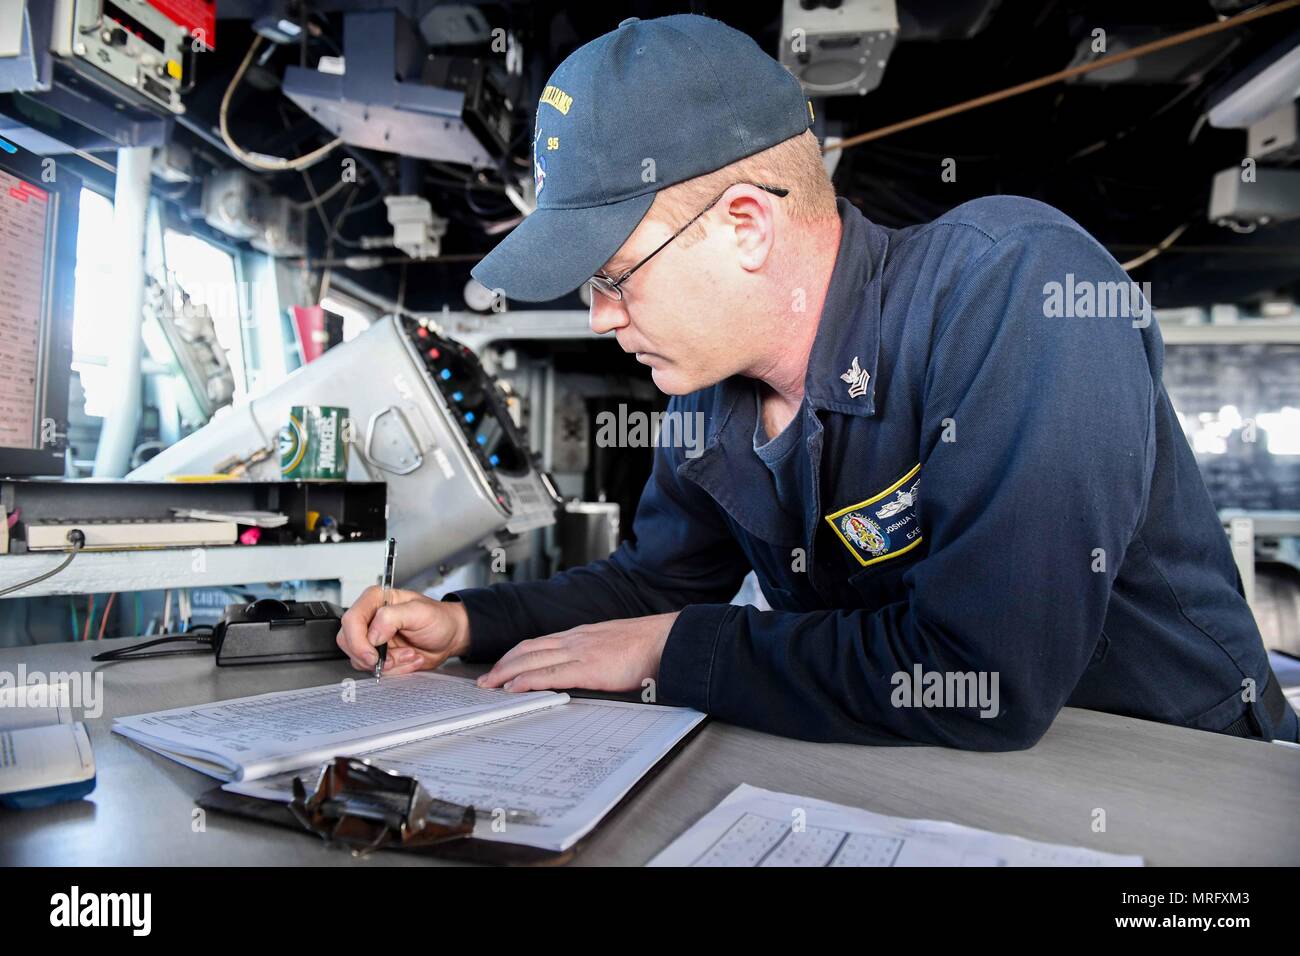 170612-N-GX781-133 BALTIC SEA (June 12, 2017) - Quartermaster 1st Class Joshua Livangood, from Superior, Wisconsin, records information in the deck logs aboard the Arleigh Burke-class guided-missile destroyer USS James E. Williams (DDG 95) during exercise BALTOPS 2017, June 12. BALTOPS 17 is the premier annual maritime-focused exercise in the Baltic Region and one of the largest exercises in Northern Europe. (U.S. Navy photo by Mass Communication Specialist 3rd Class Colbey Livingston/Released) Stock Photo